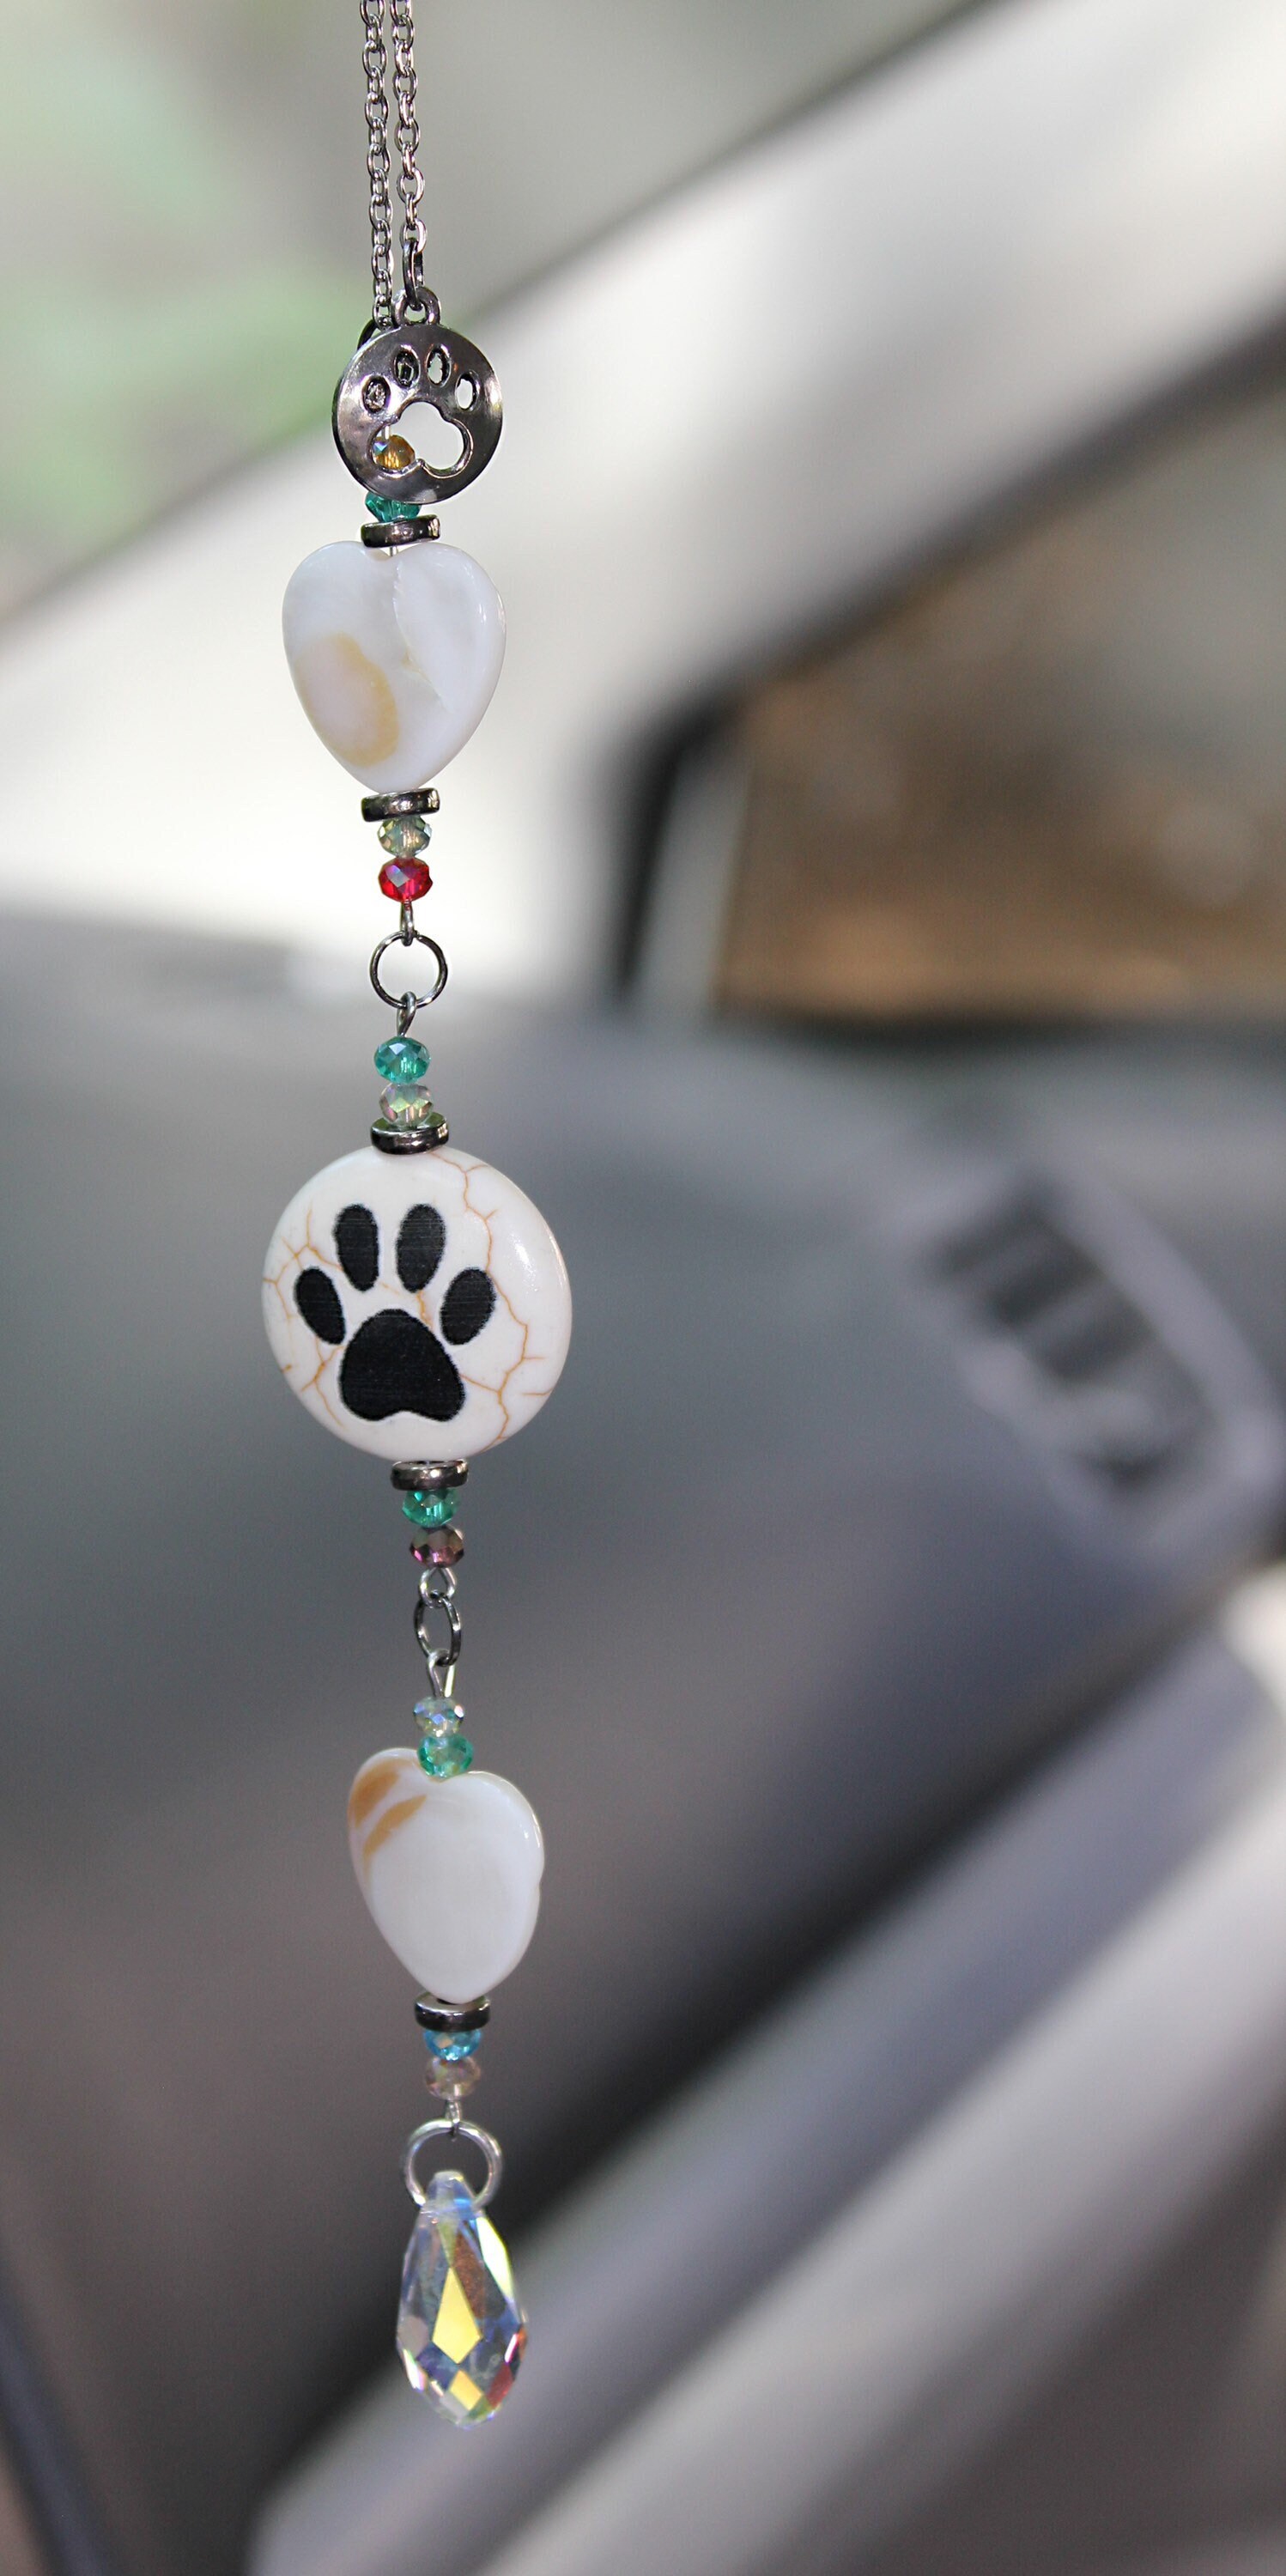 Cute Sleeping Dog Animal Acrylic Car Mirror Hanging Pendant Decoration  Accessories at Rs 179/piece, USB Chargers in New Delhi